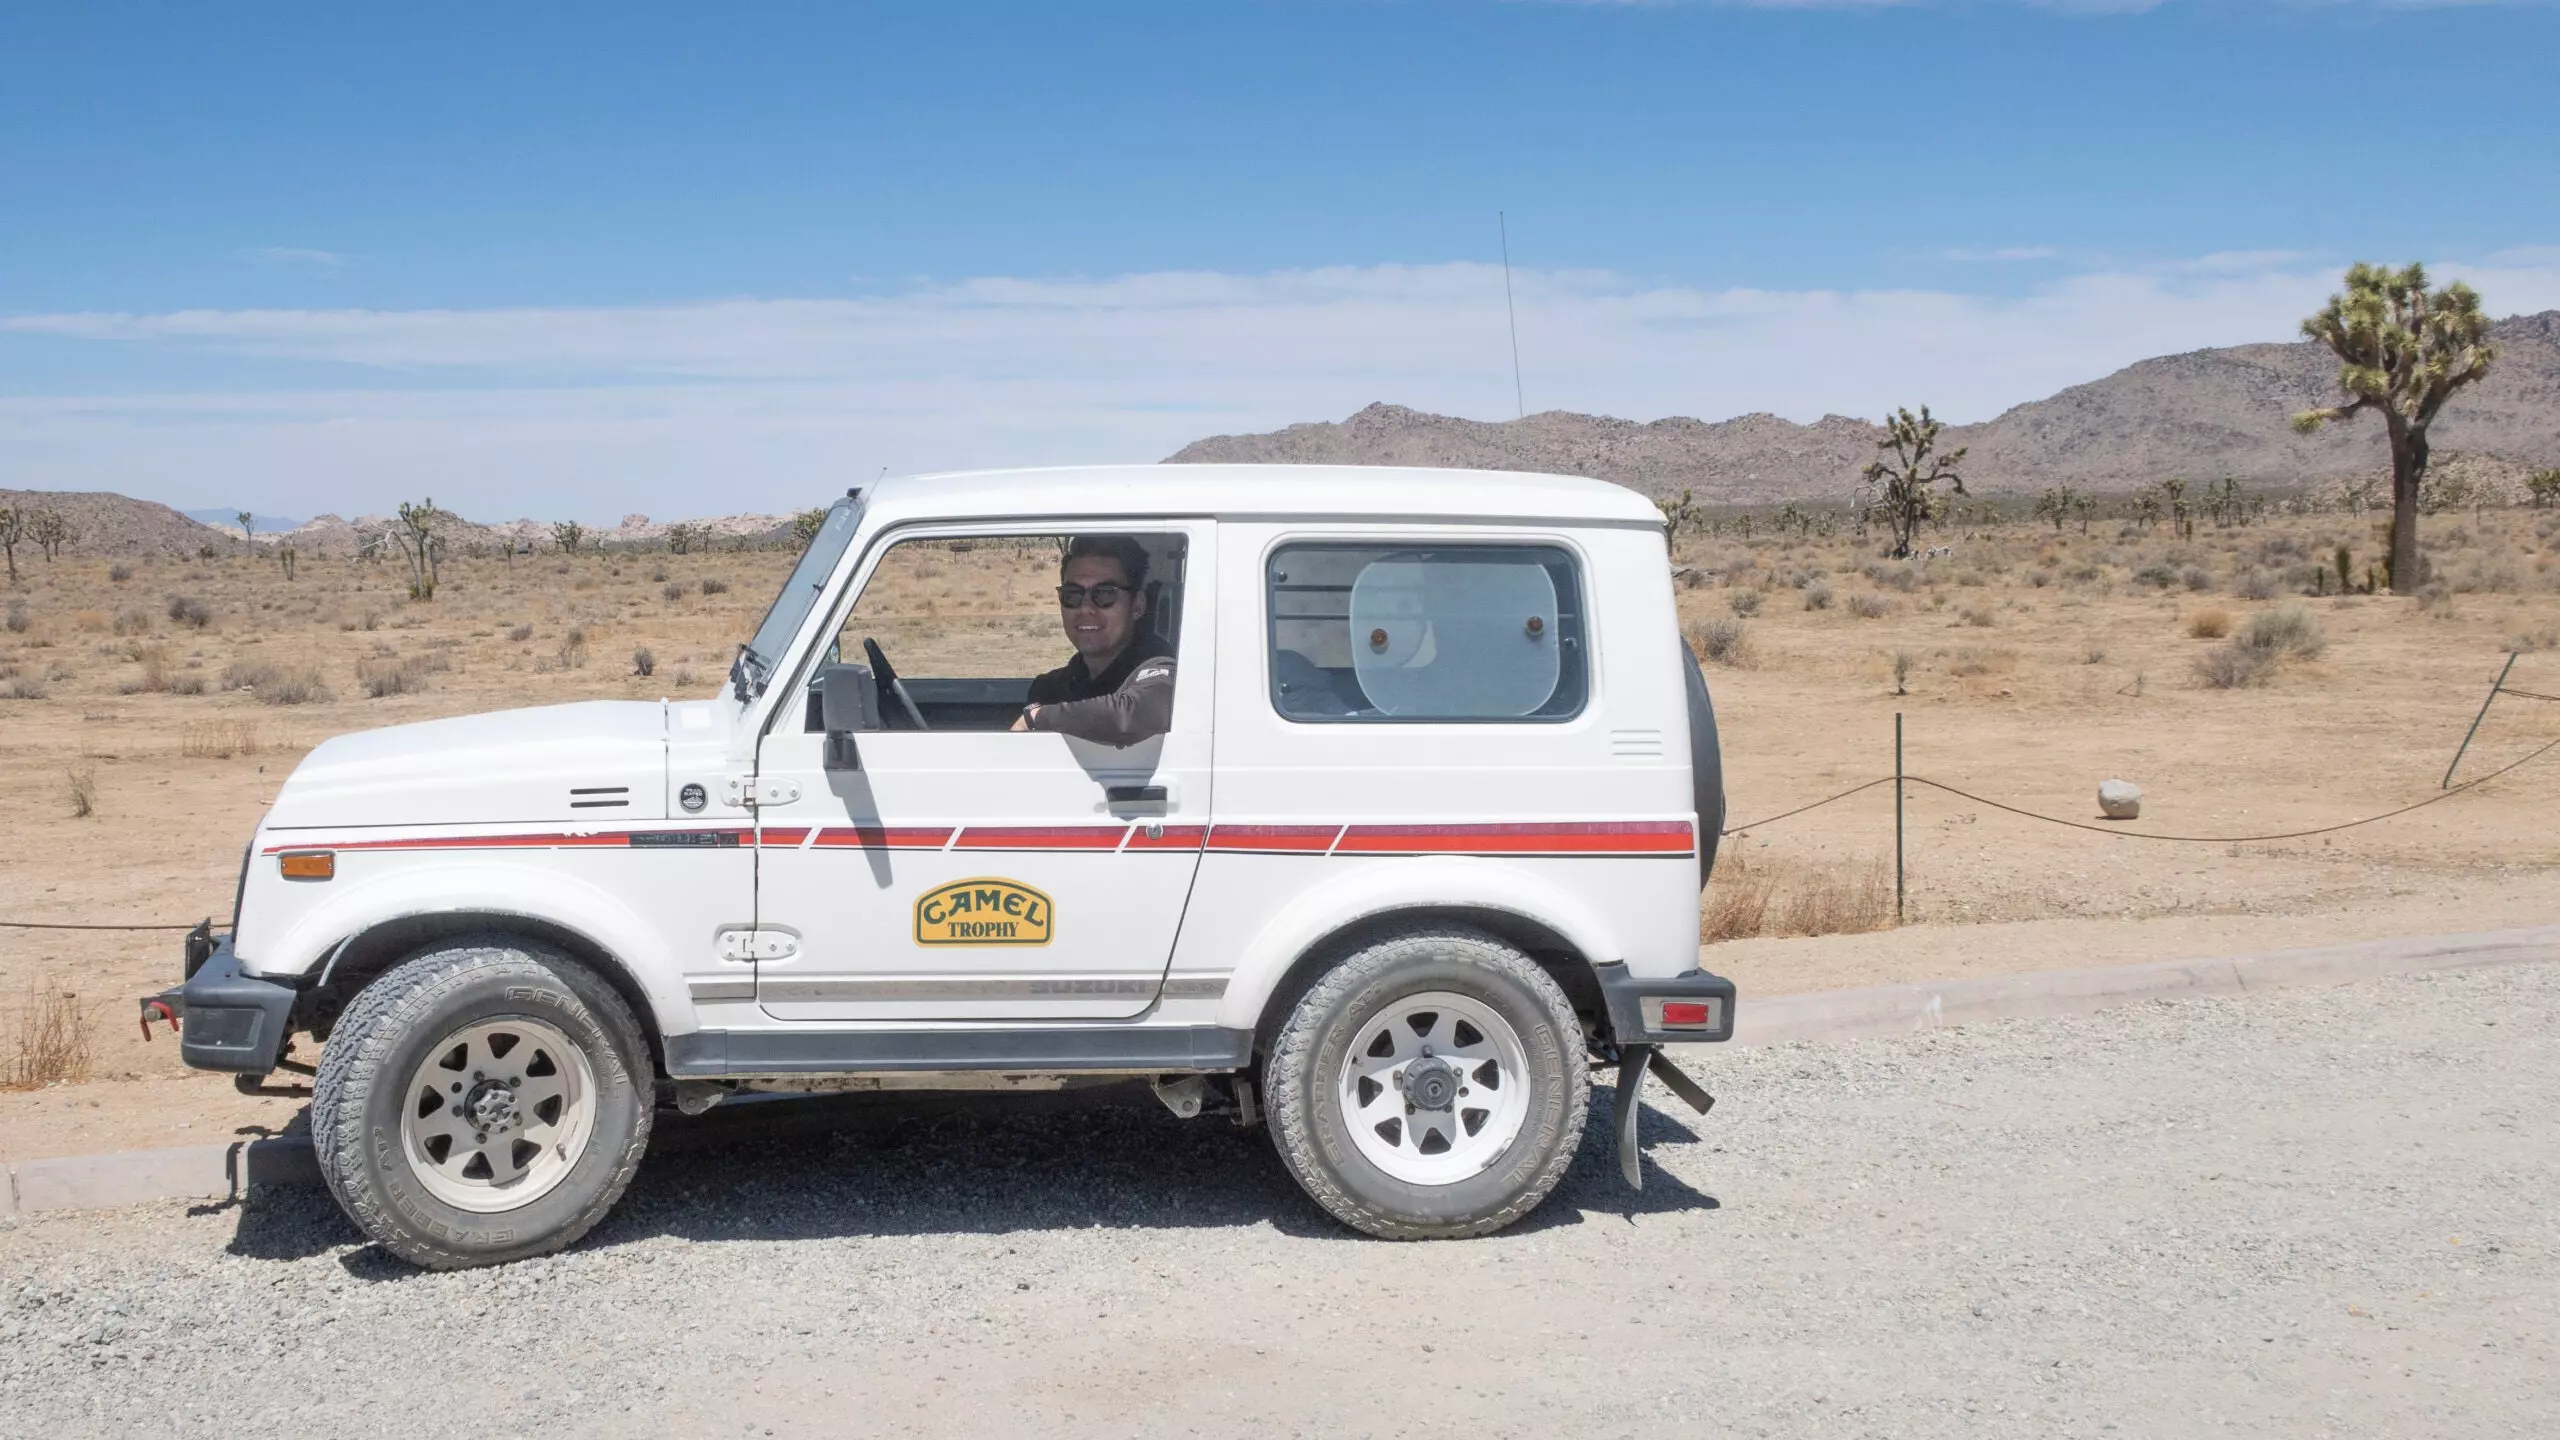 This Suzuki Samurai Dreams of Driving in a Camel Trophy Rally When It Grows Up